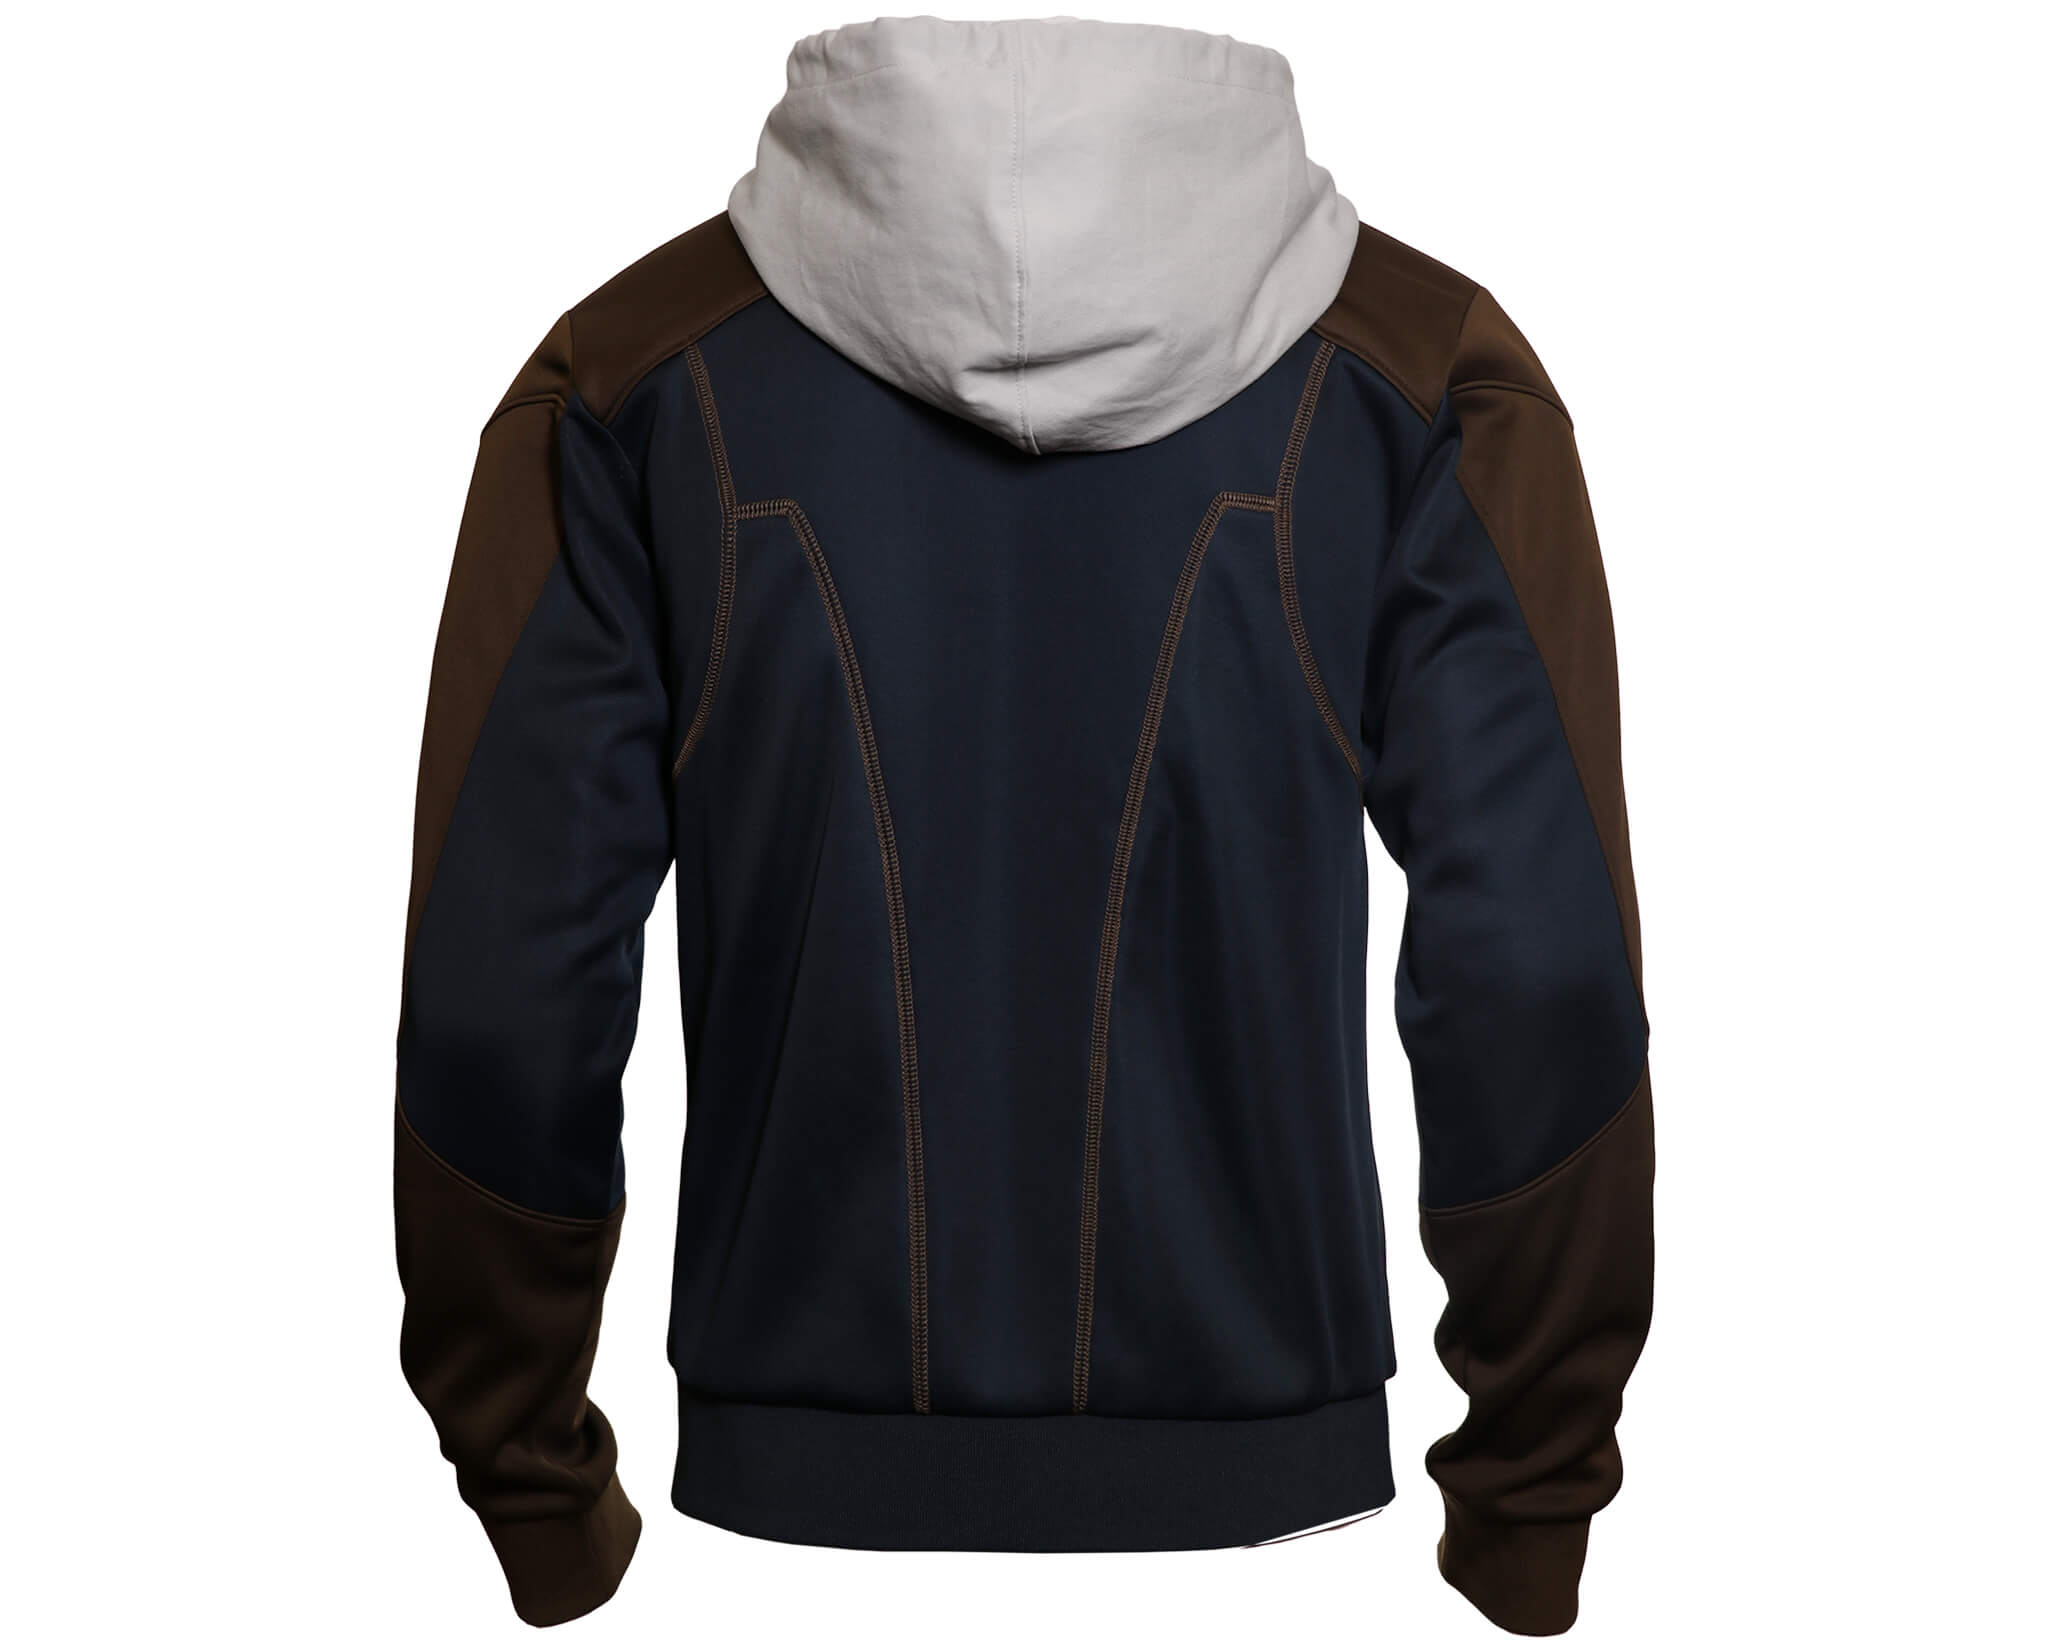 Assassin's Creed | Edward Kenway Hoodie | Ubisoft Store